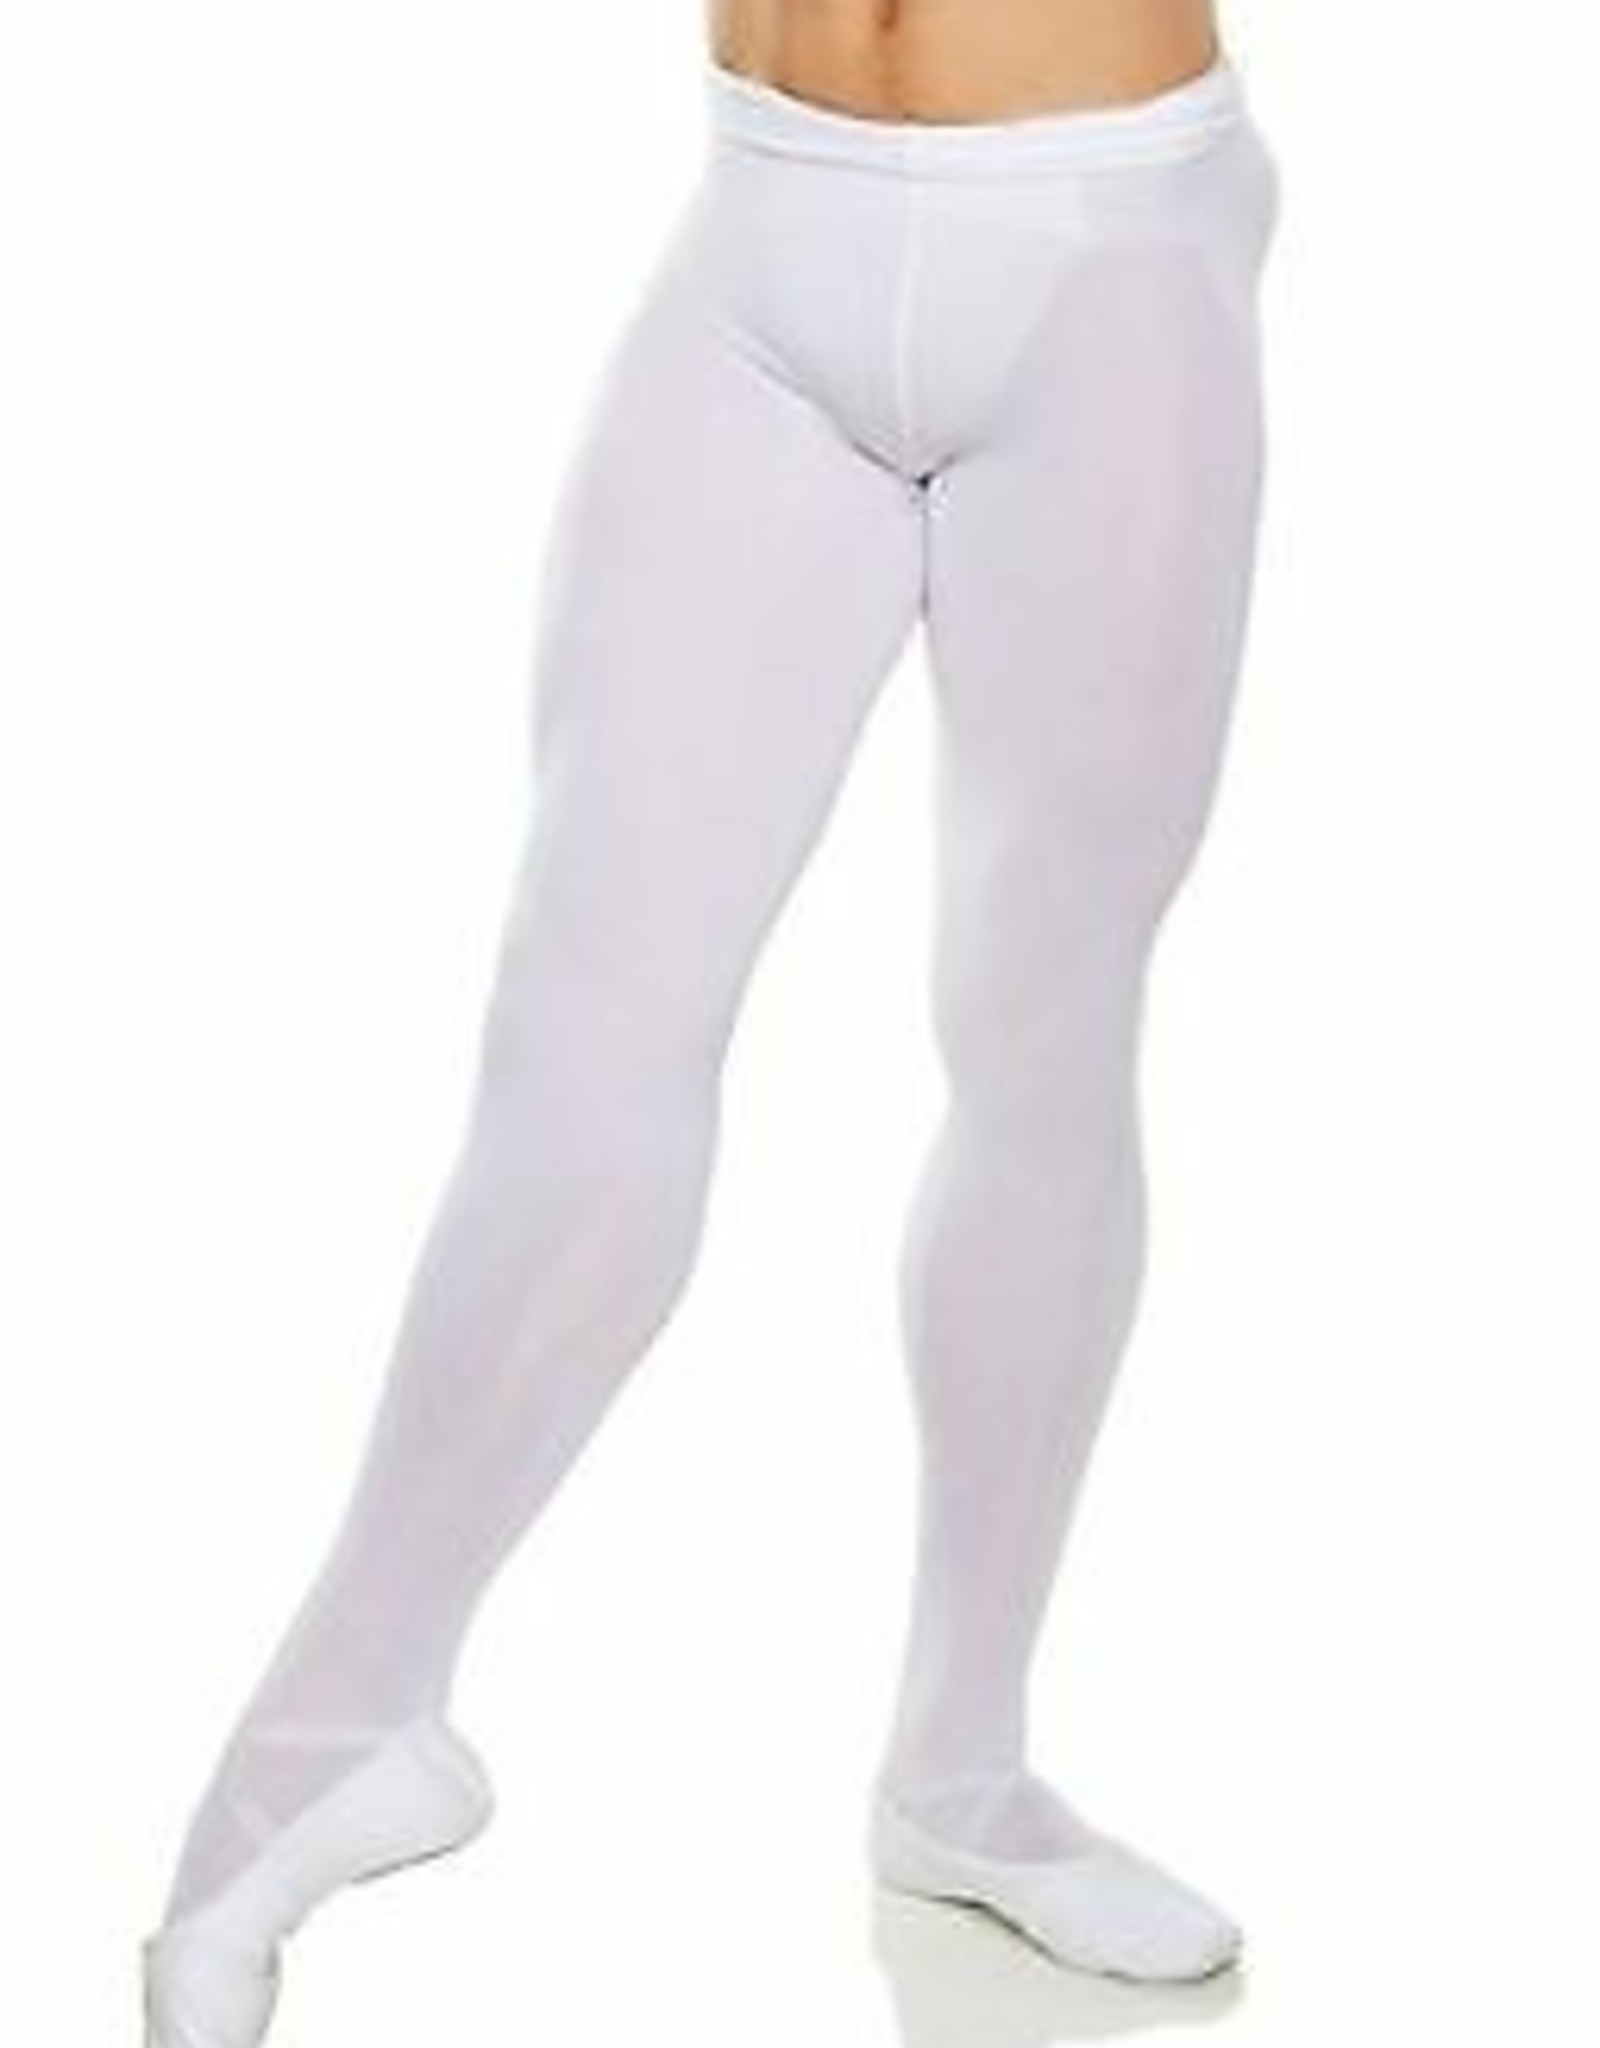 Boys' Convertible Dance Tights - Dyeable White – The Dance Shop